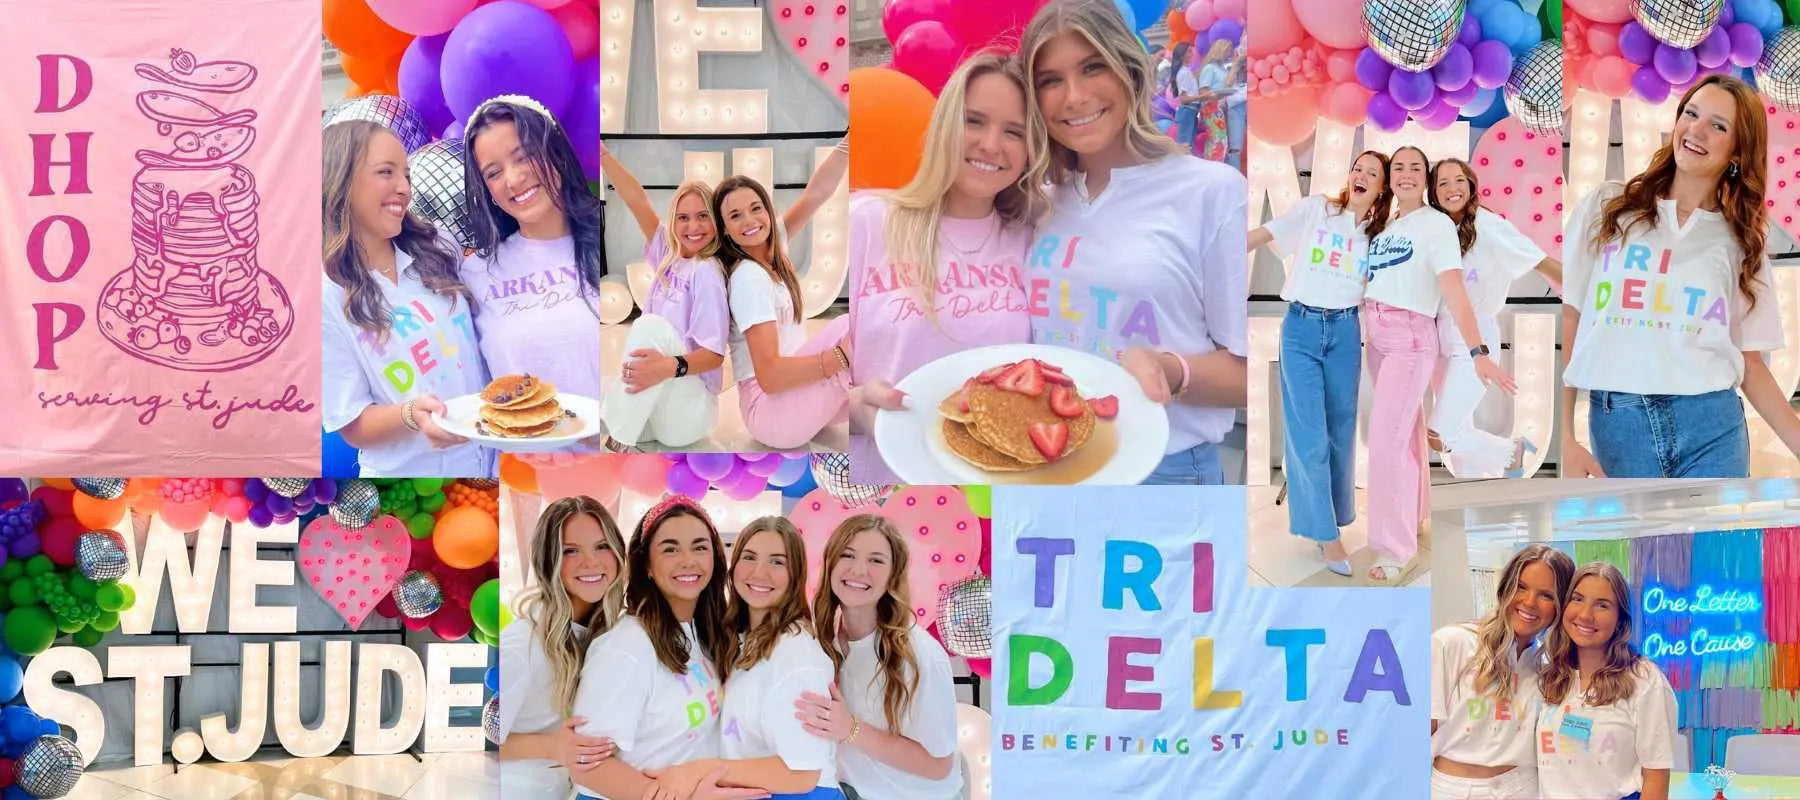 Everything You Need To Know About Tri Delta & St. Jude's